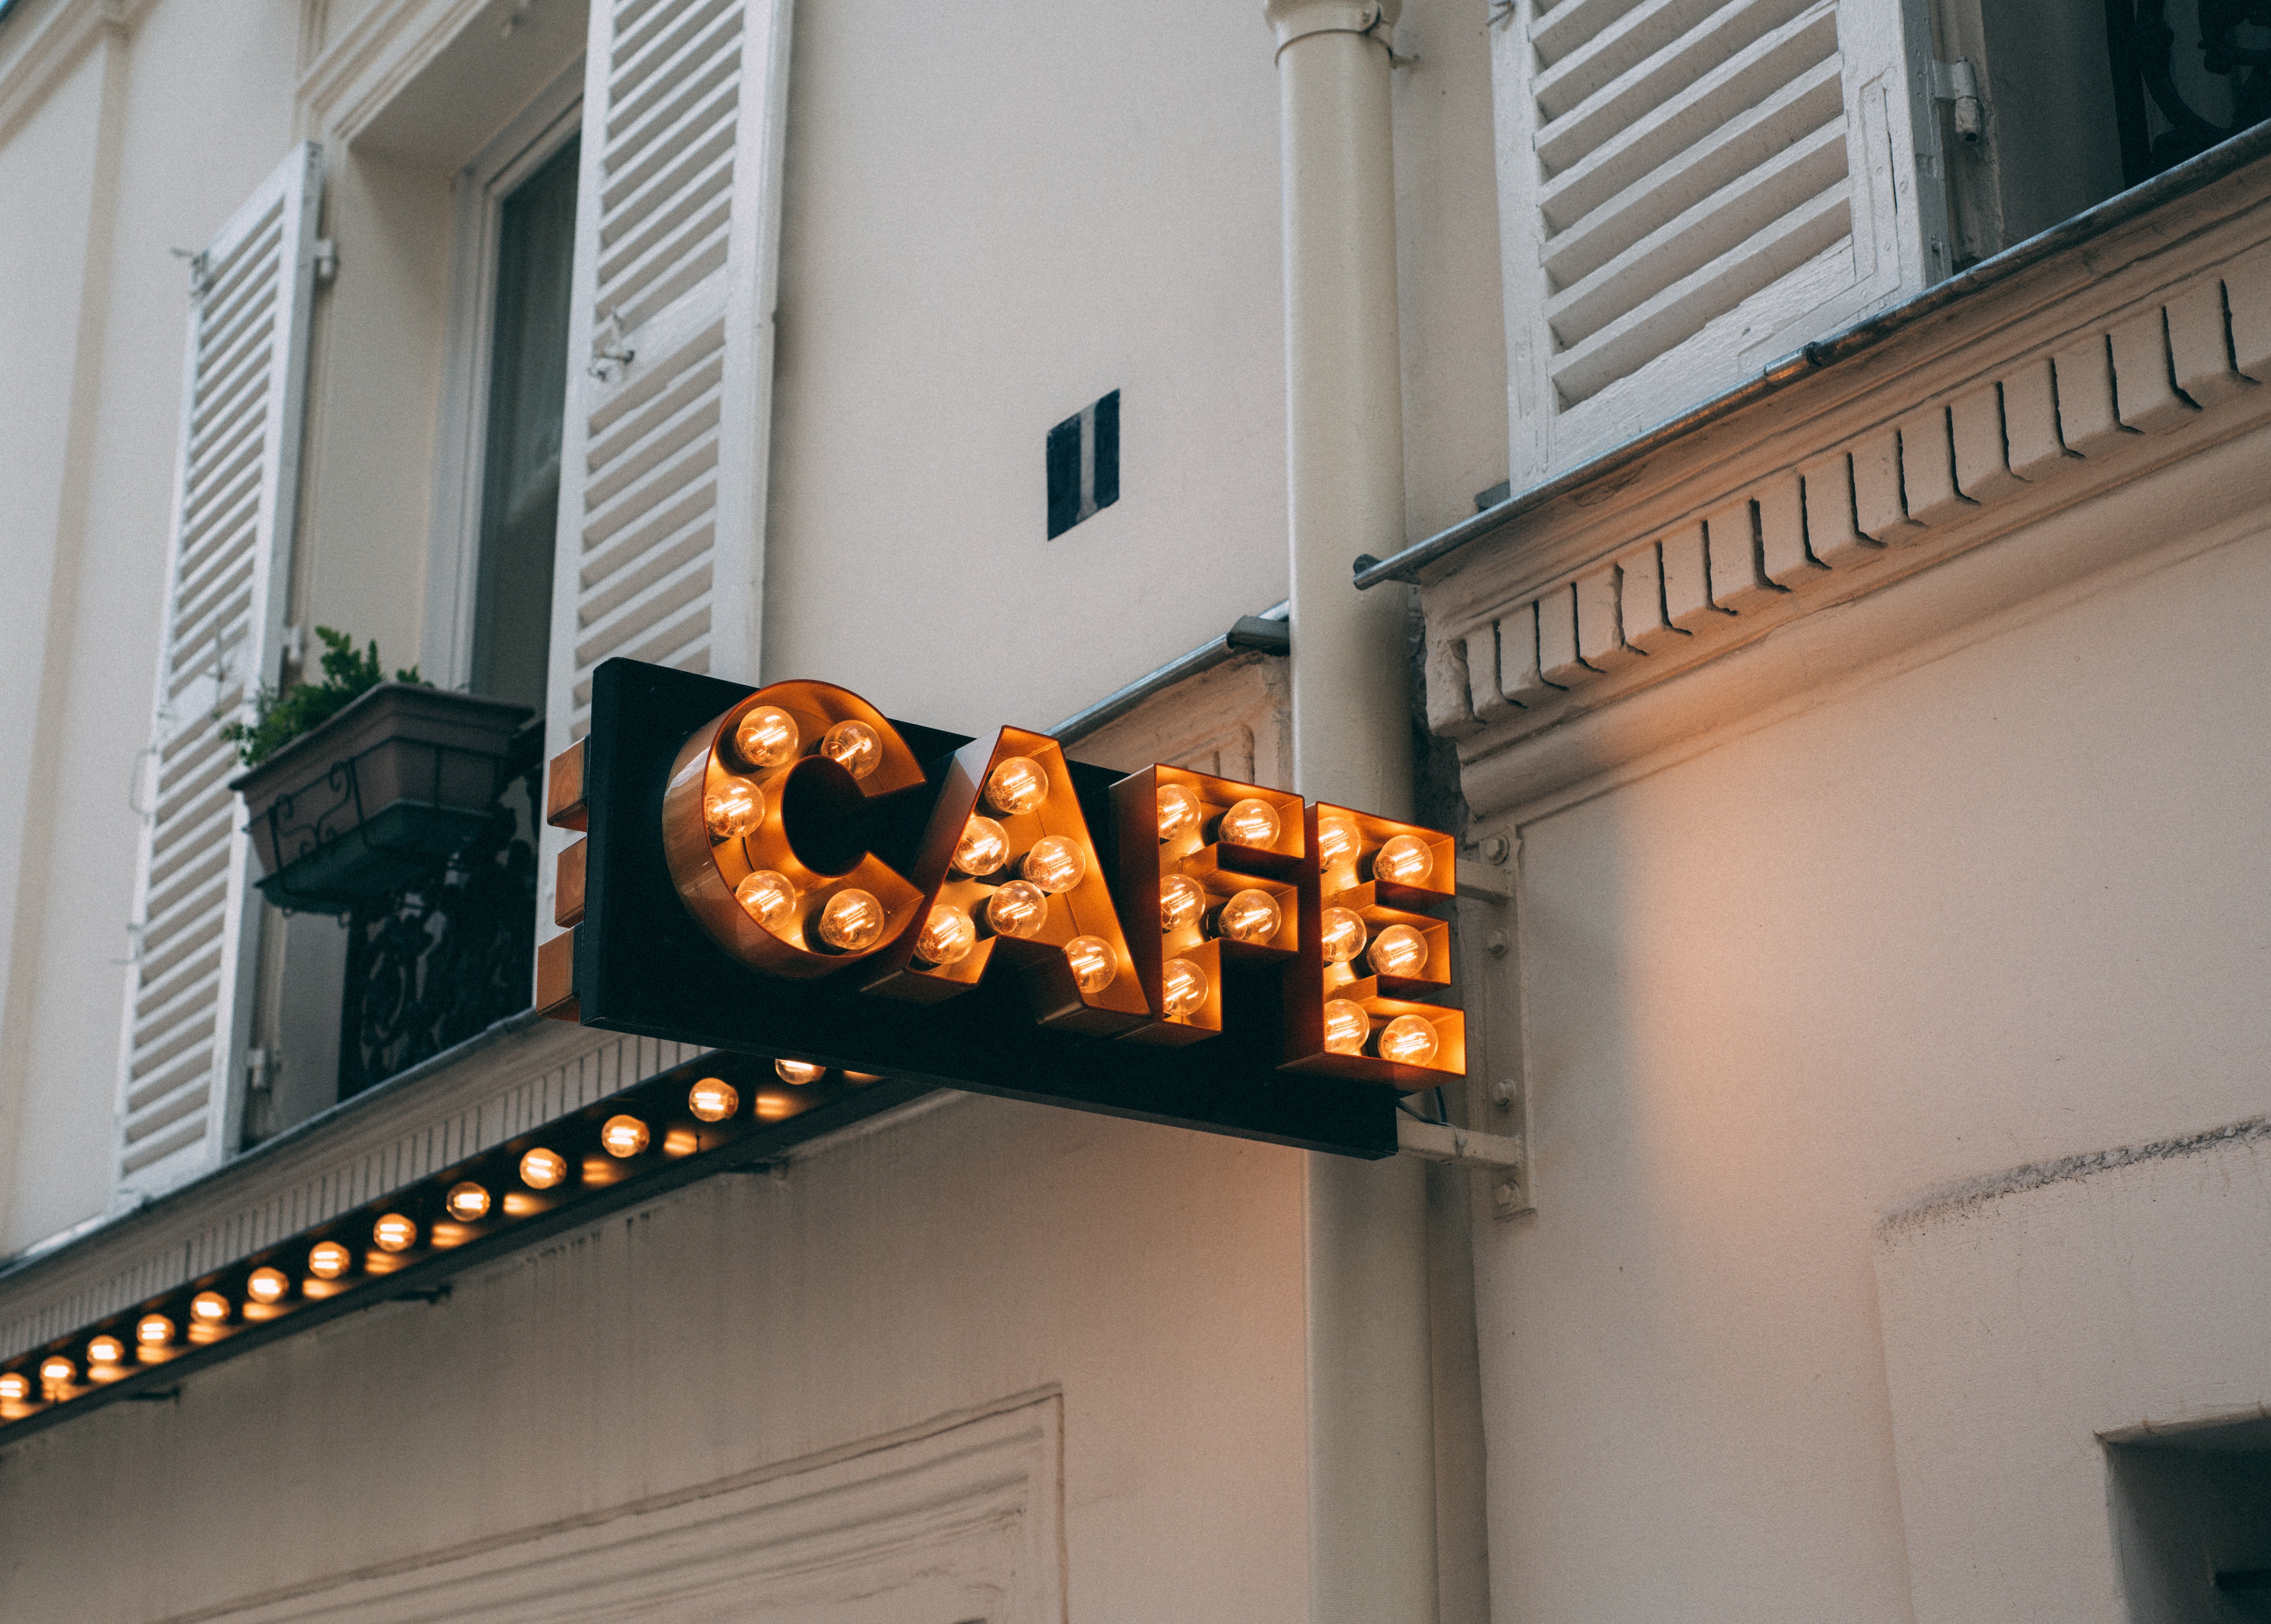 Katherine headed to a small café opposite Roger's house & watched for suspicious activity. | Source: Pexels